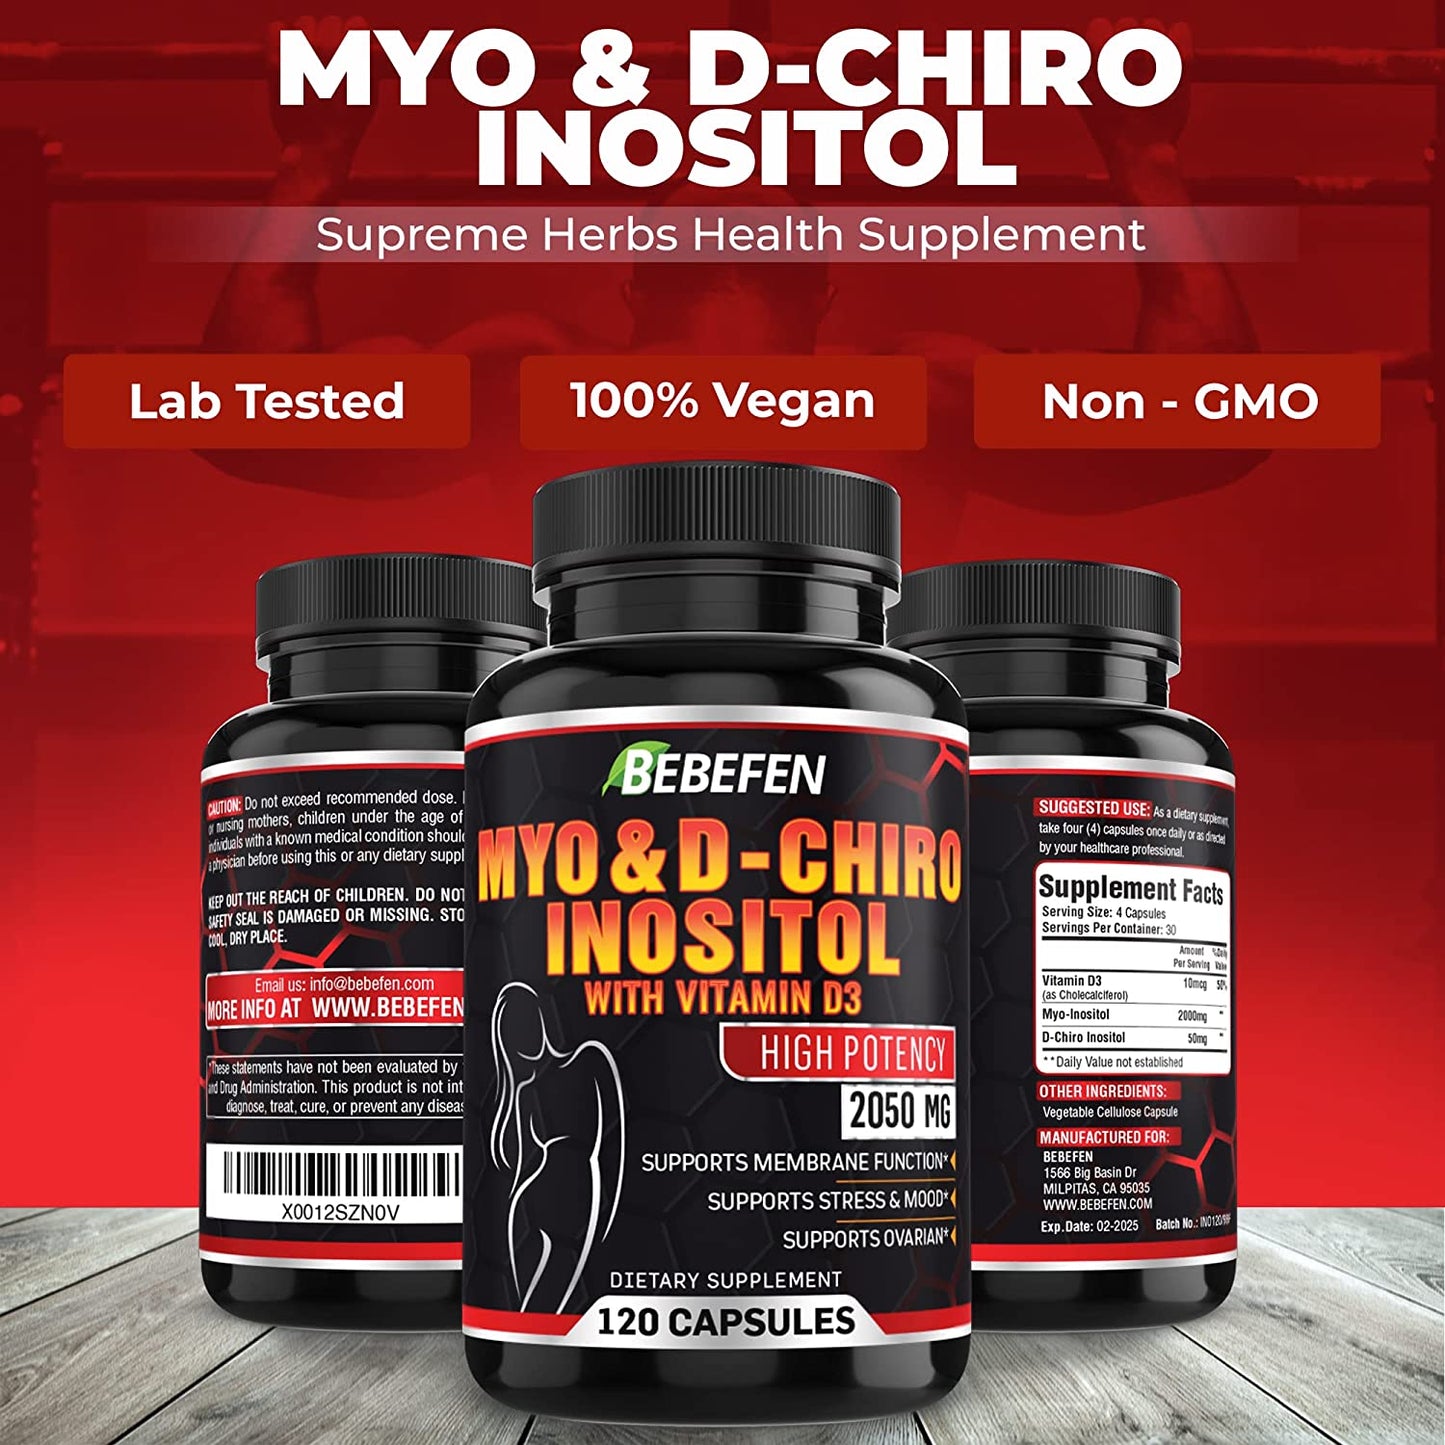 Myo-Inositol & D-Chiro Inositol Blend Capsule | Most Beneficial 40:1 Ratio | Hormone Balance & Healthy Ovarian Support for Women | Vitamin D3 | 120 Inositol Supplement Caps